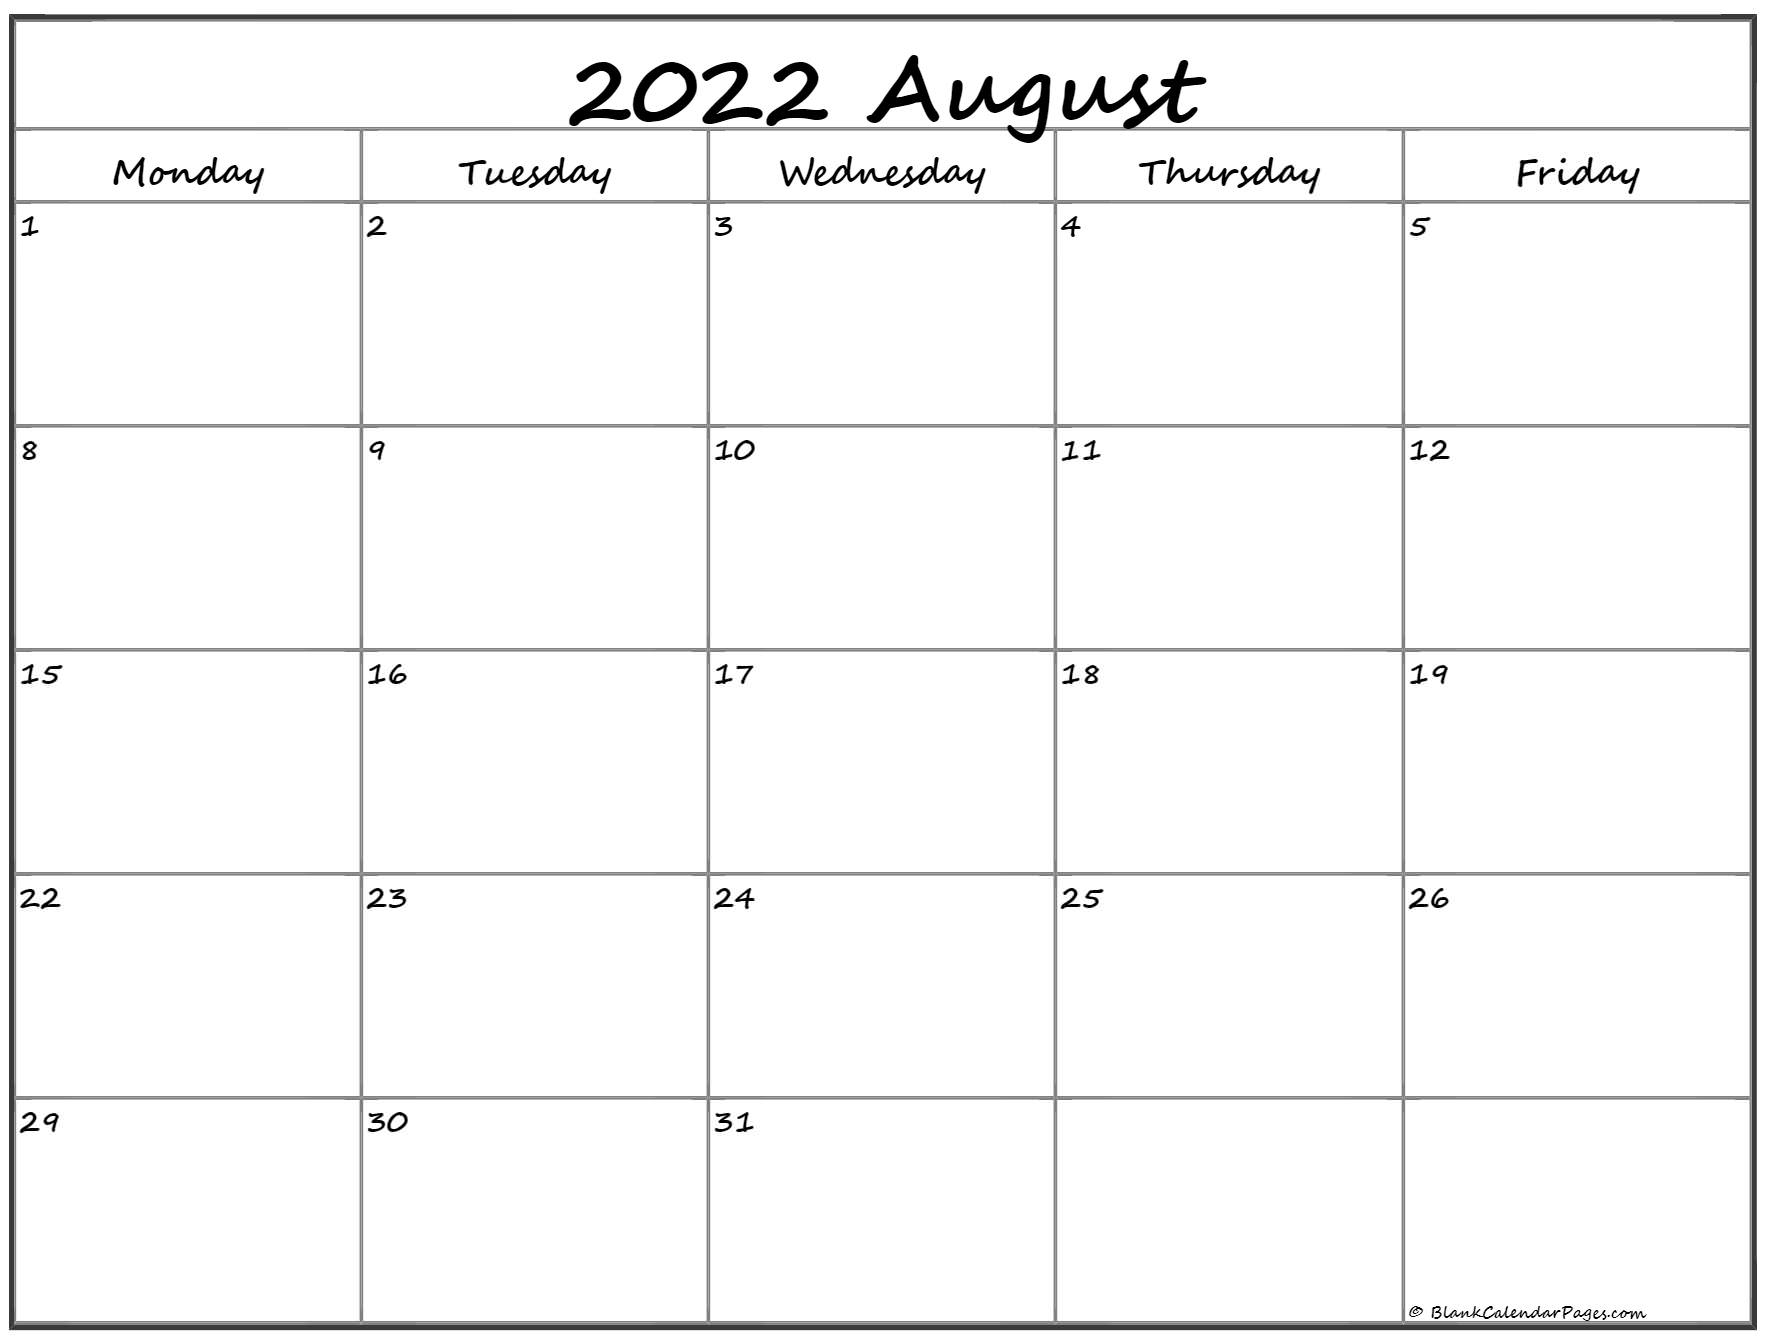 2021 Calendar That Shows Only Monday Through Friday